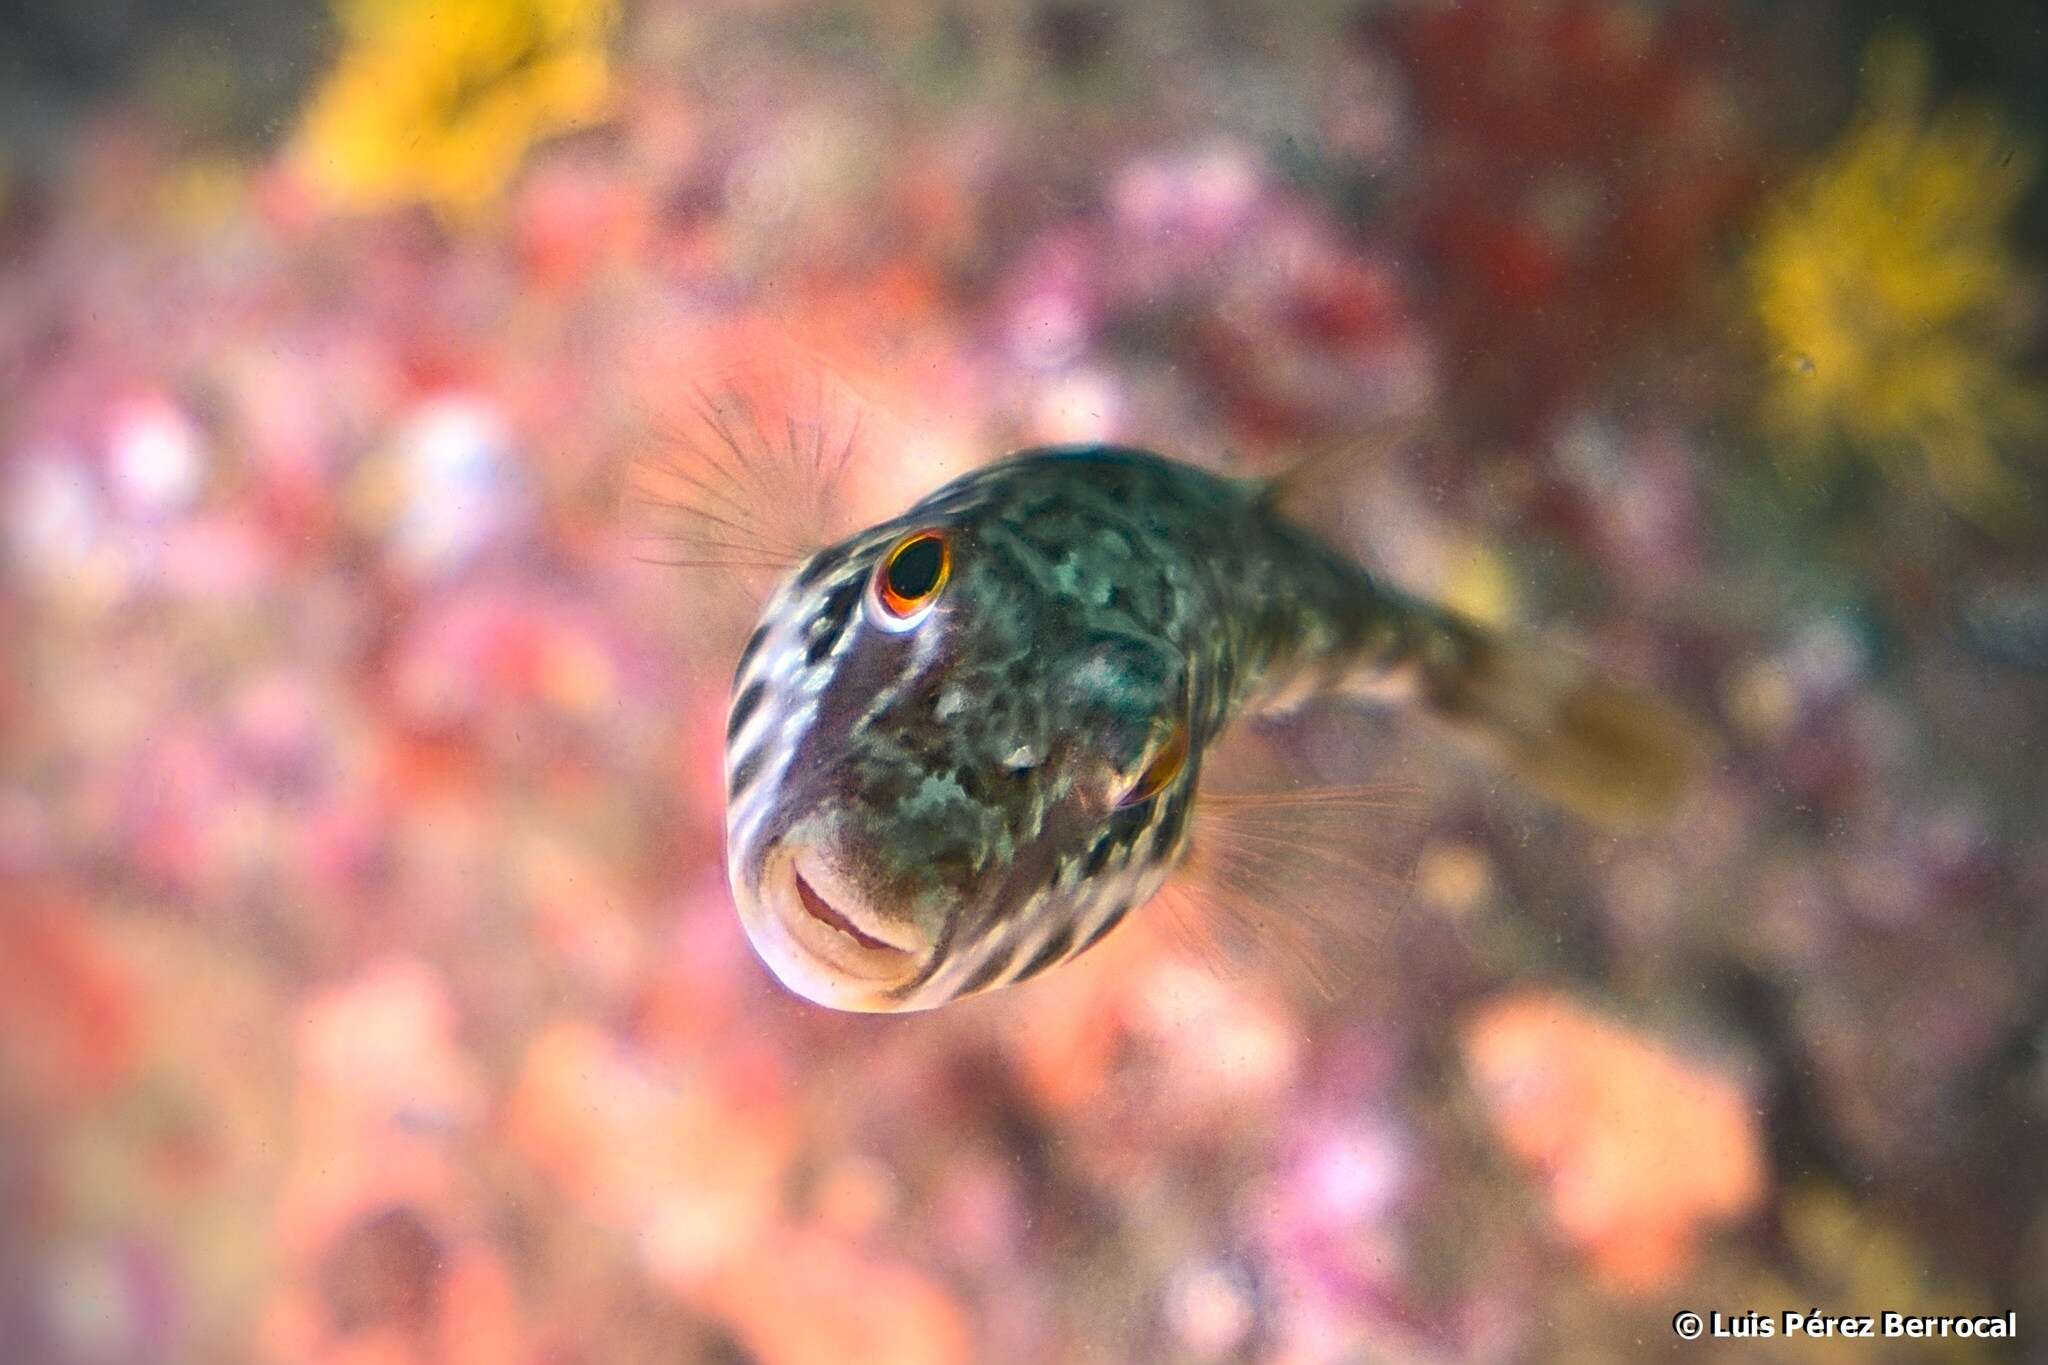 Image of Guinean Puffer